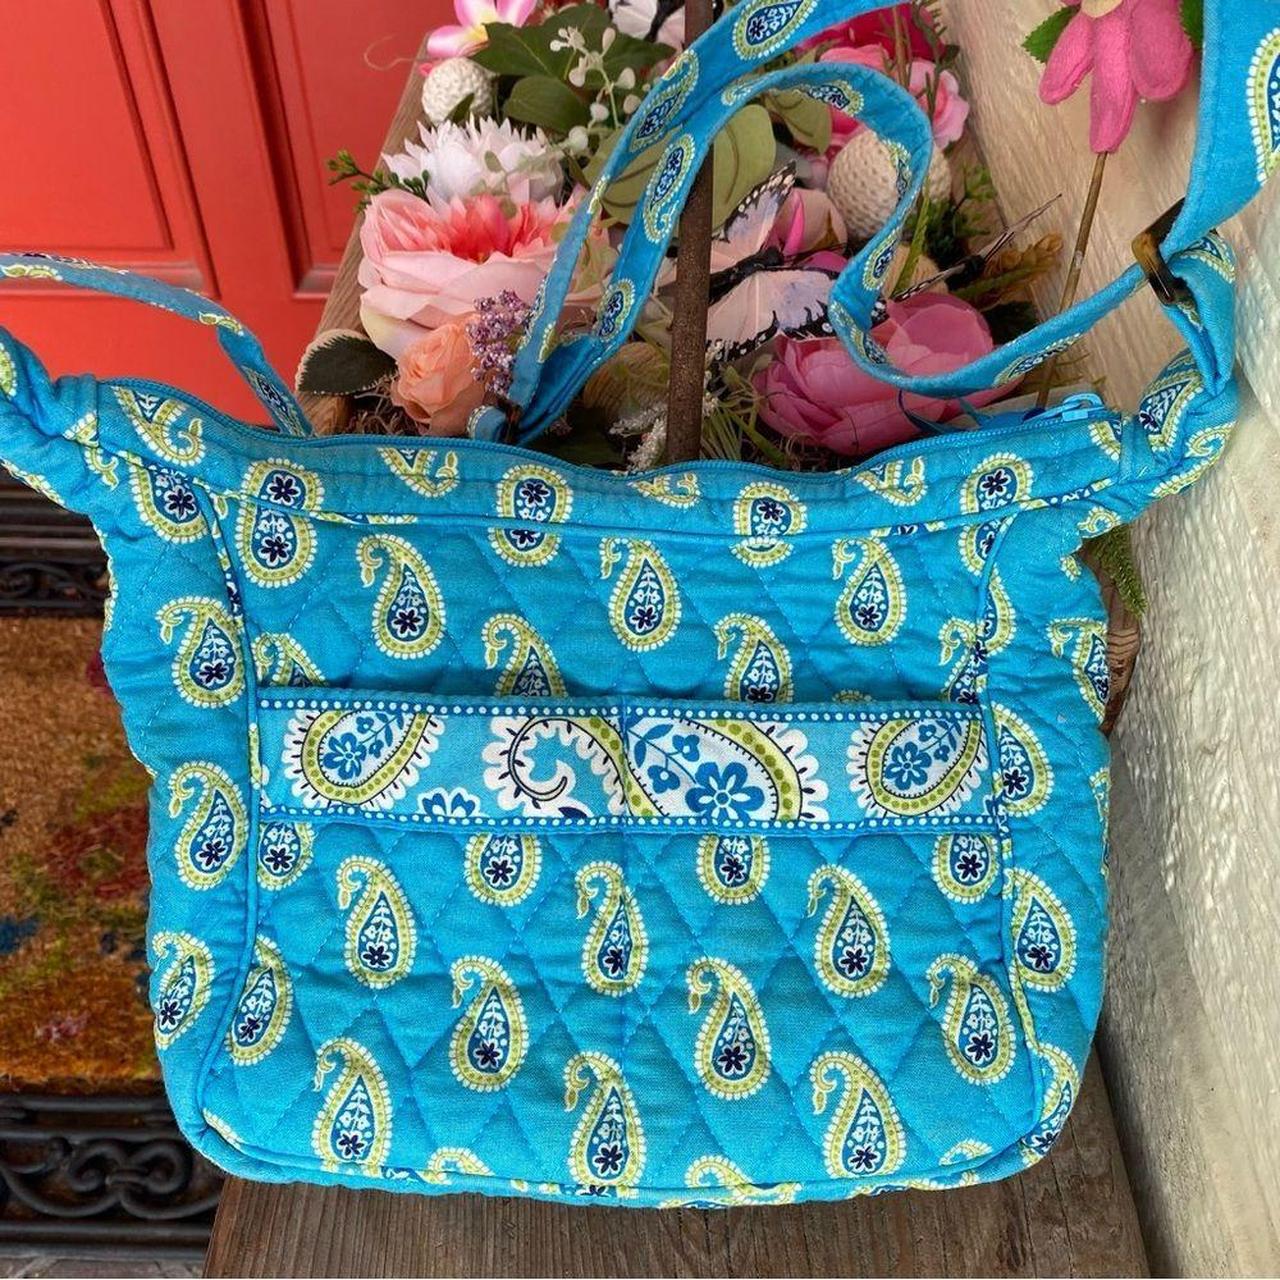 Get 25% off Vera Bradley bags, totes and crossbodies